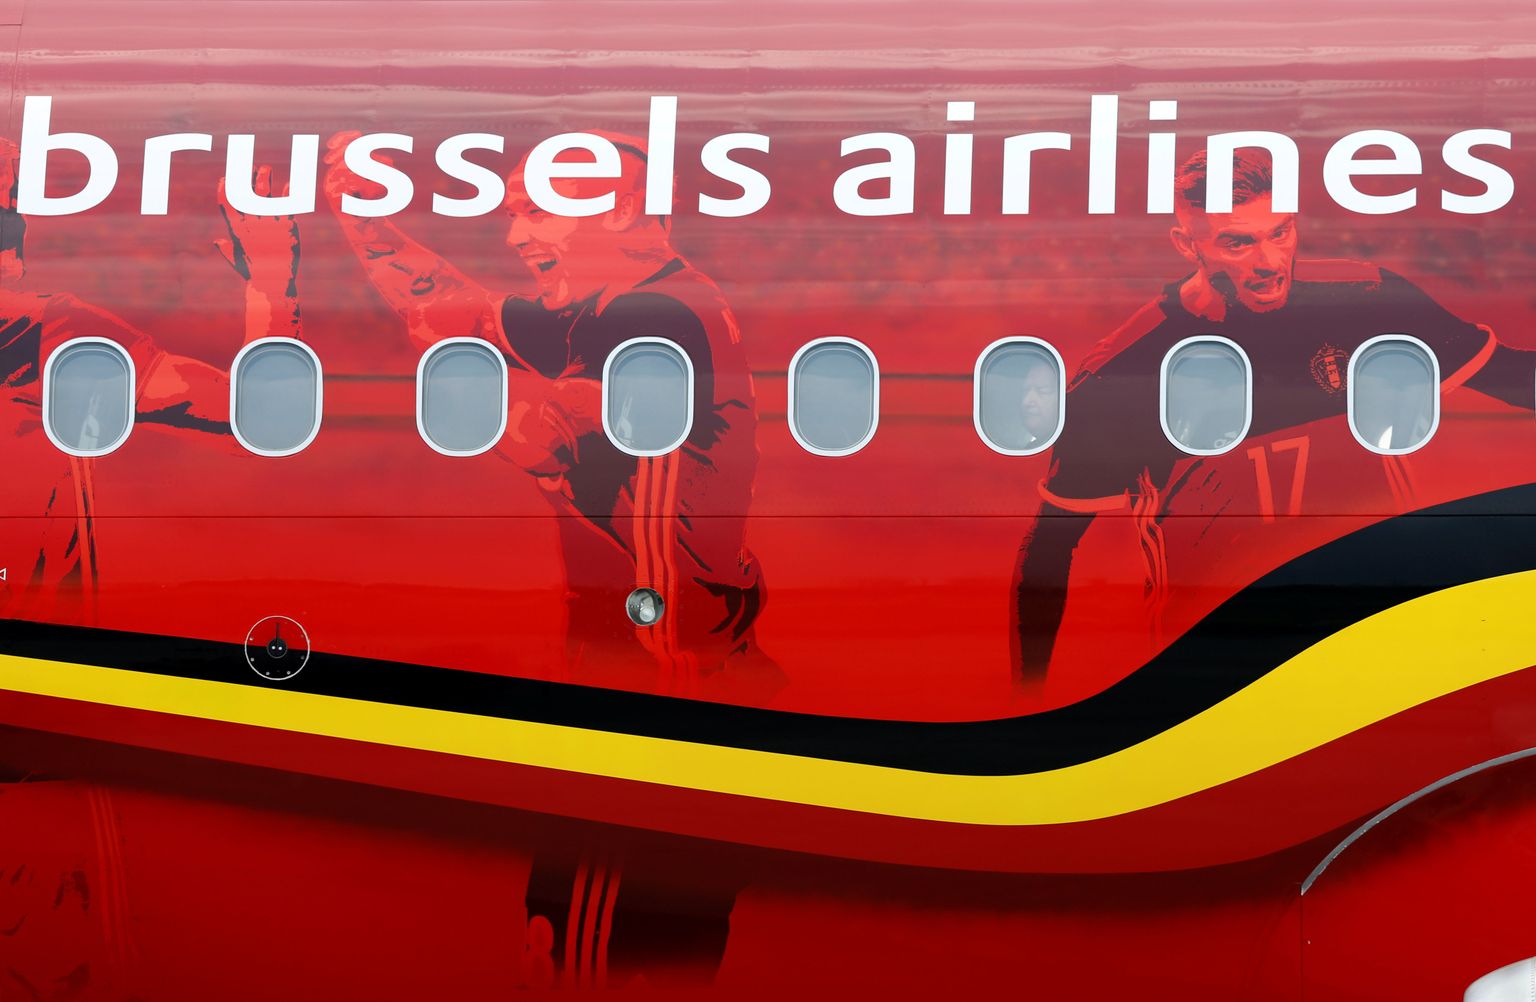 Brussels airlines.